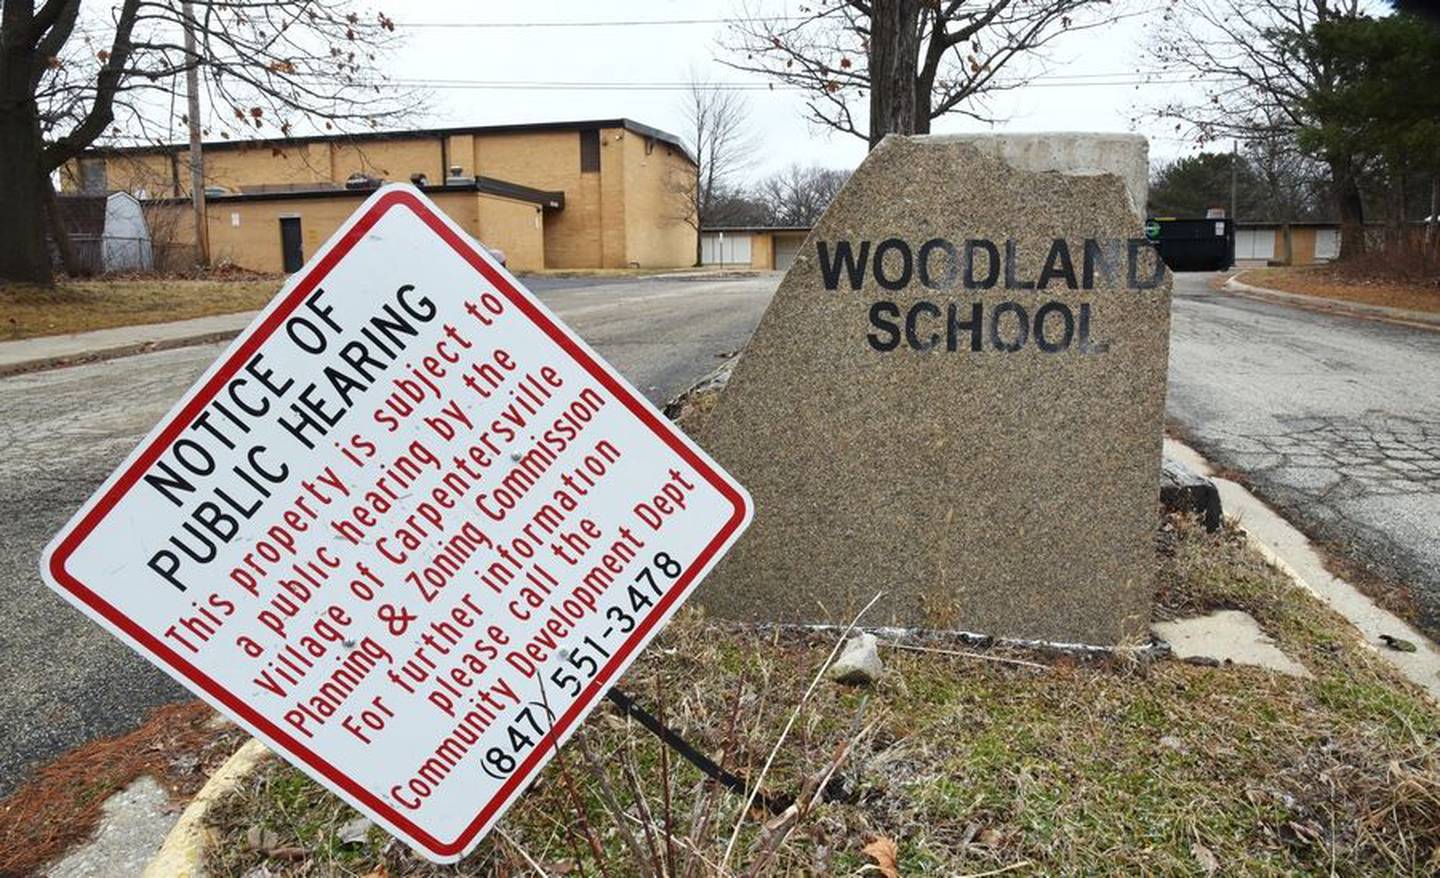 The former Woodland Elementary School in Carpentersville will be the Boys & Girls Clubs of Dundee Township's latest impact center. The center will provide STEM programs and other services to about 300 middle and high school students.